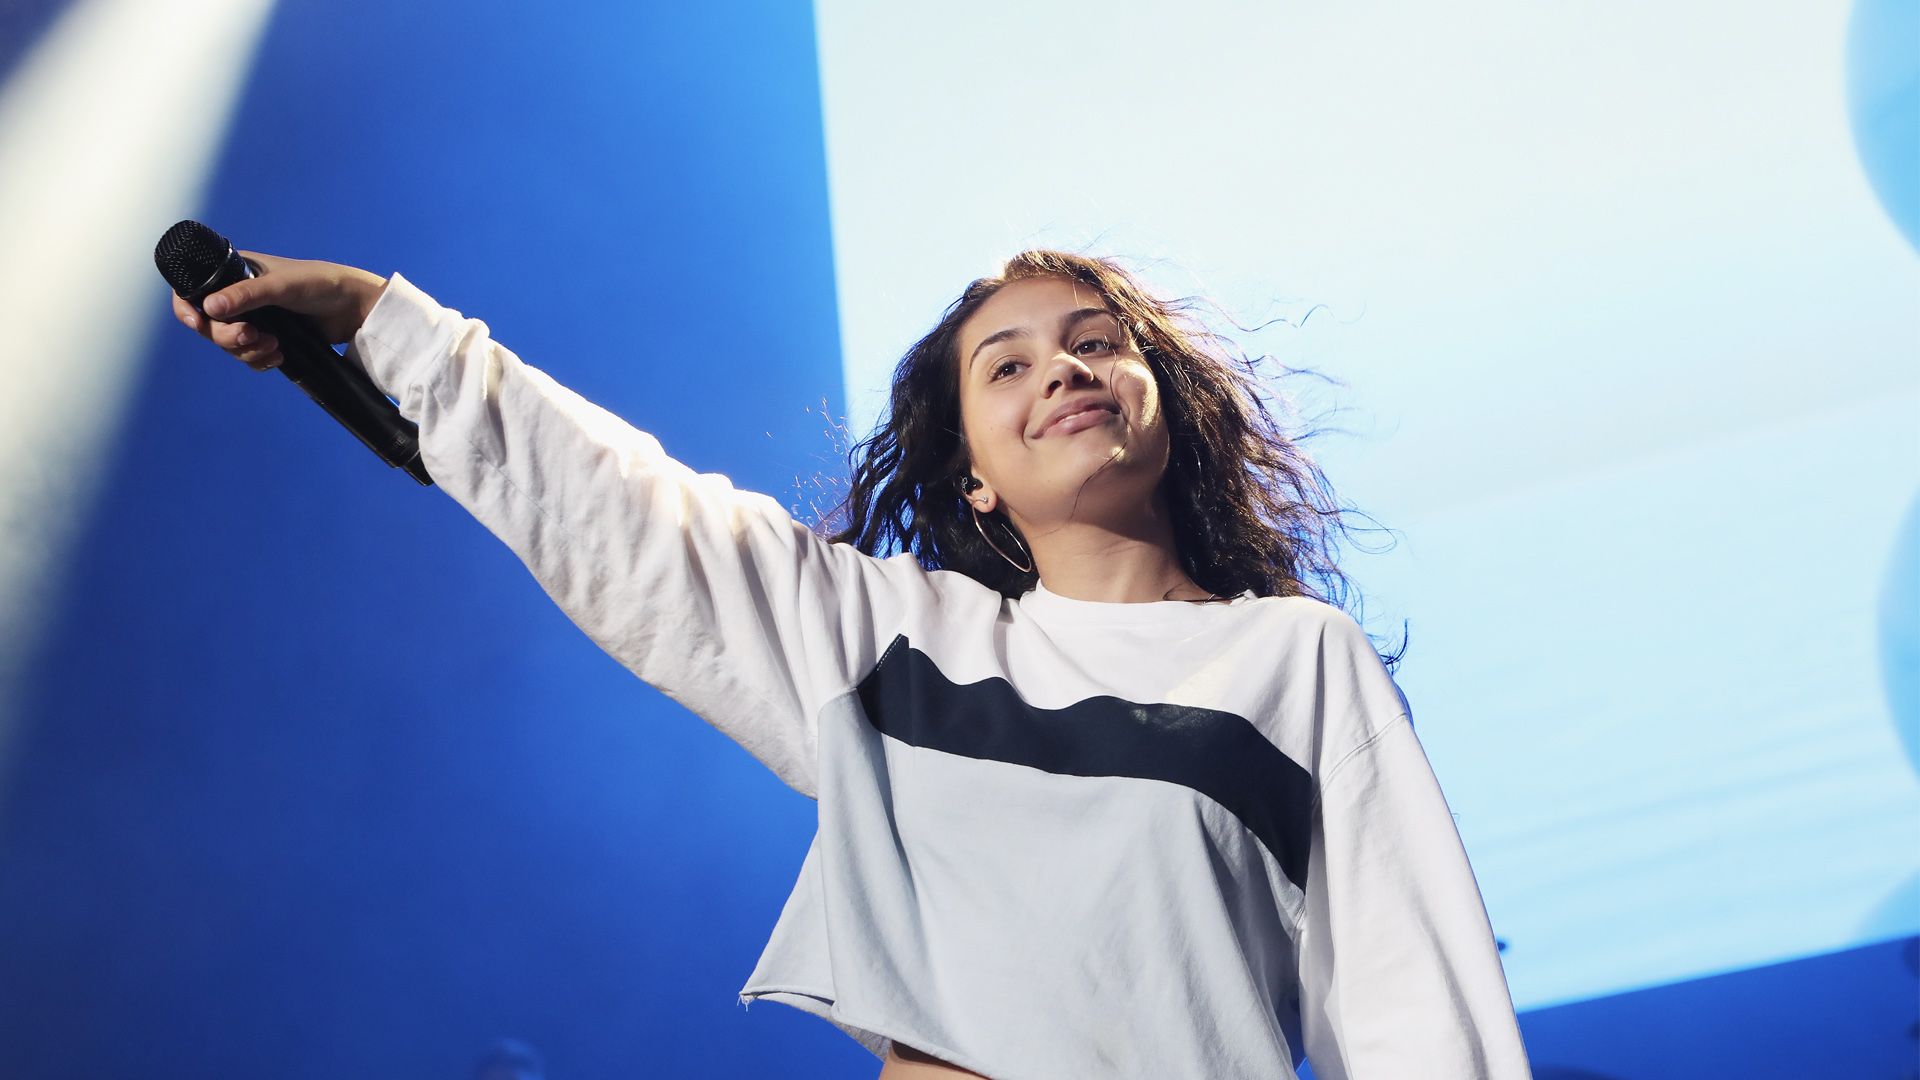 Alessia Cara Wallpapers